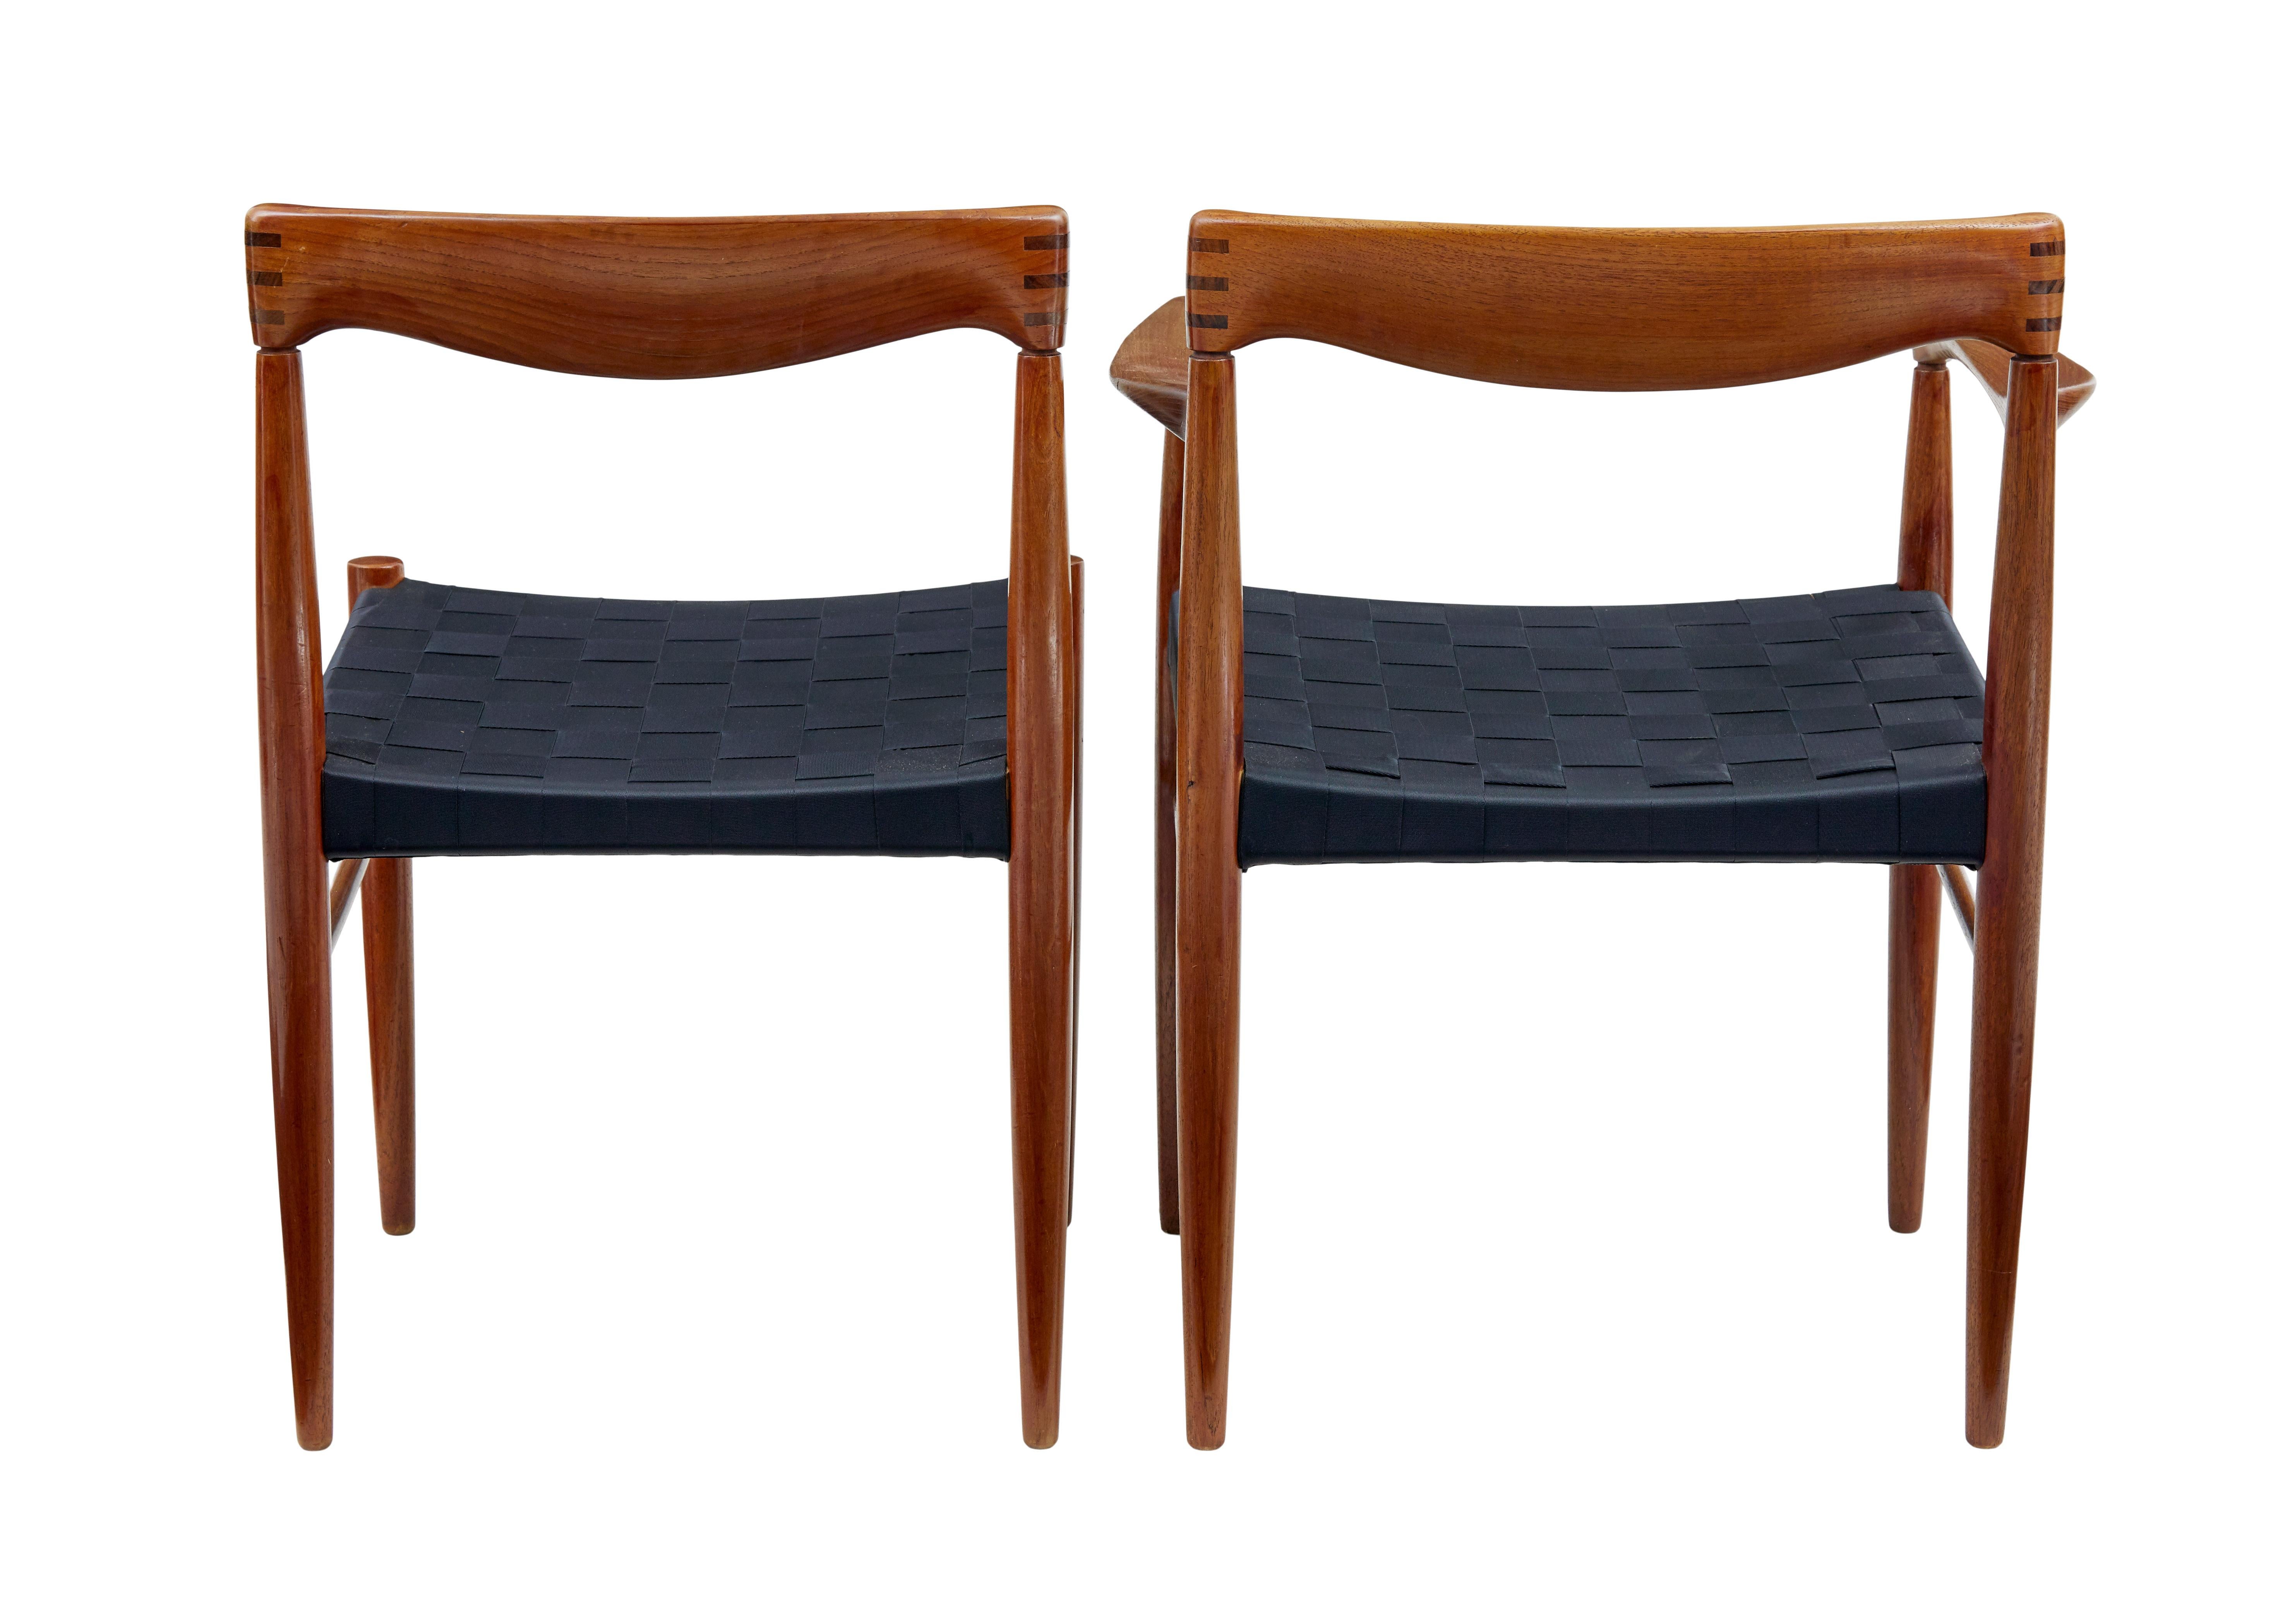 Set of 10 mid century teak dining chairs by Bramin In Good Condition For Sale In Debenham, Suffolk